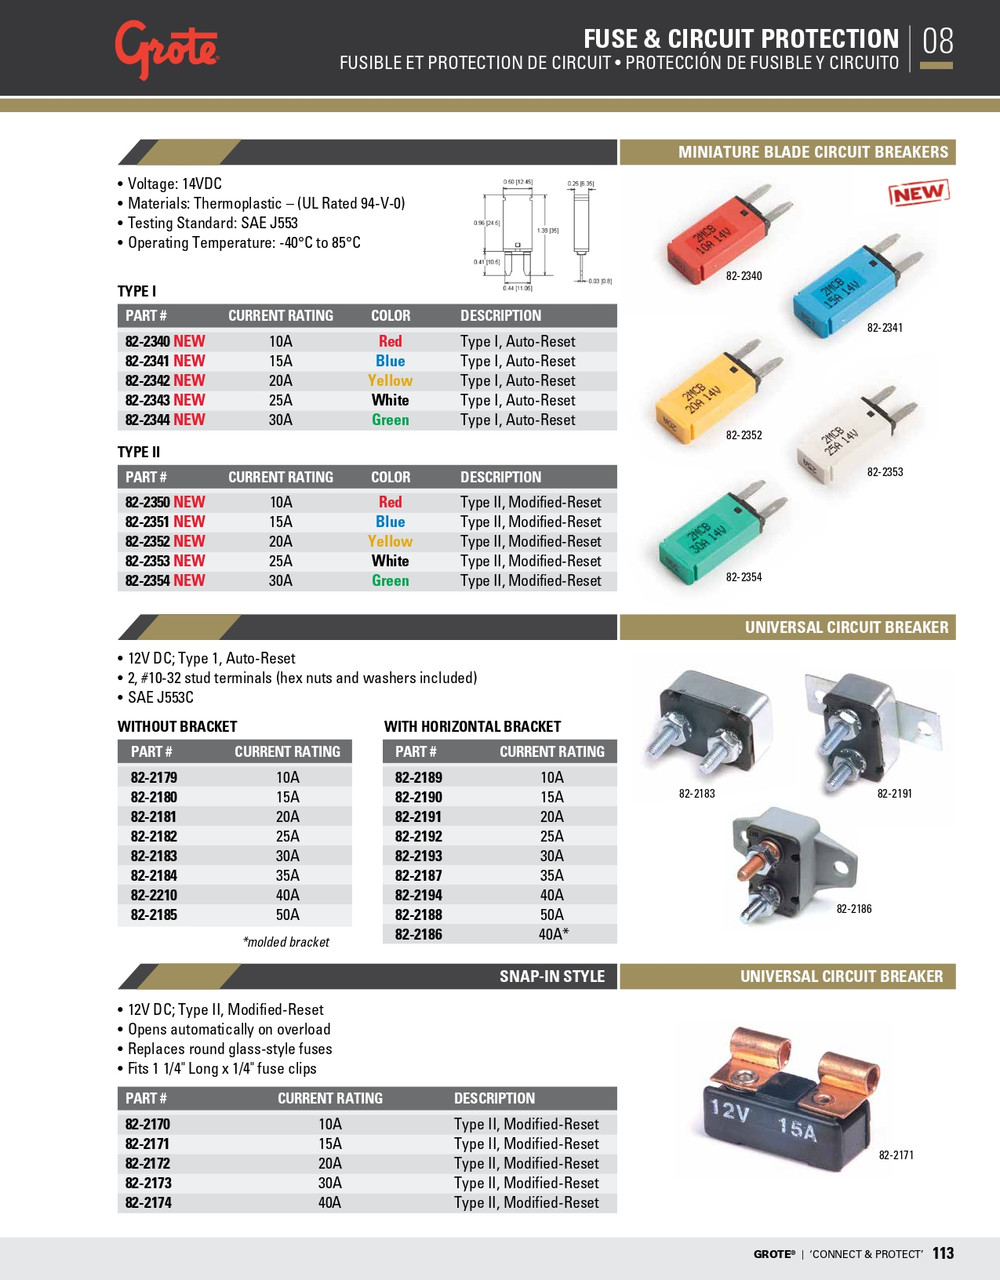 Universal Snap-In Style Circuit Breaker 30A  82-2173